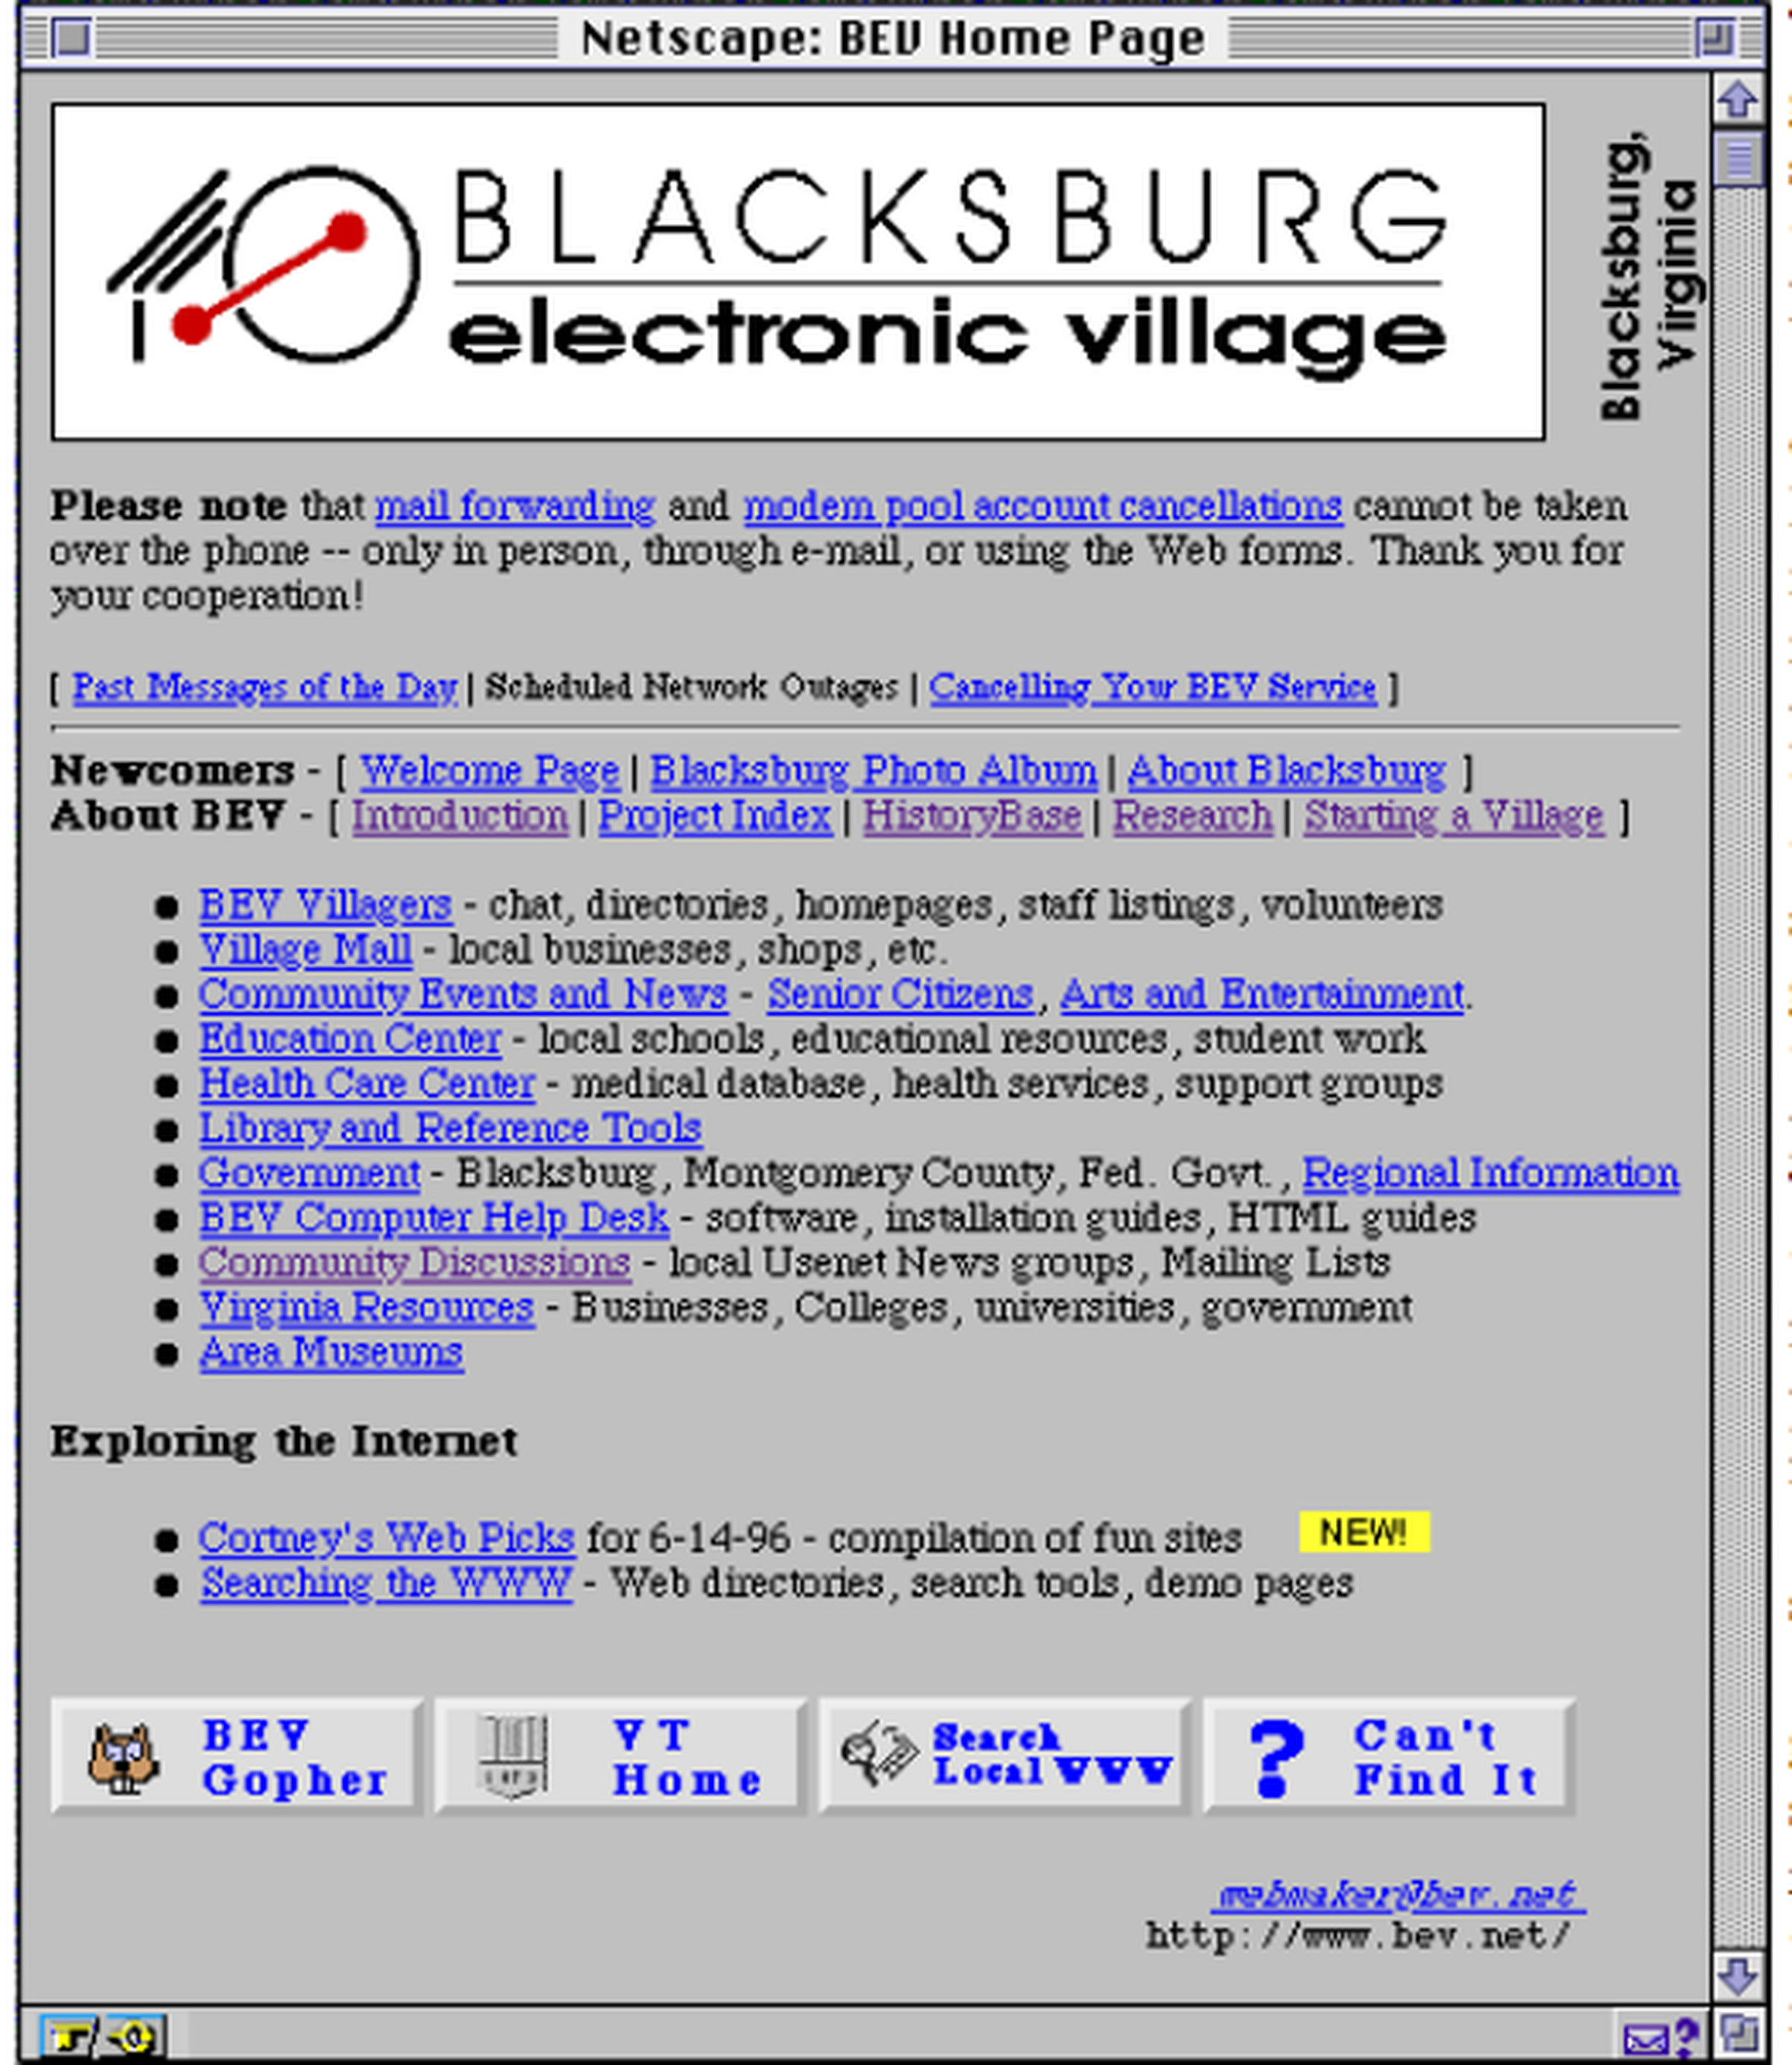 The BEV's homepage in June 1996, with links to the Village Mall, community events, and Usenet News groups.